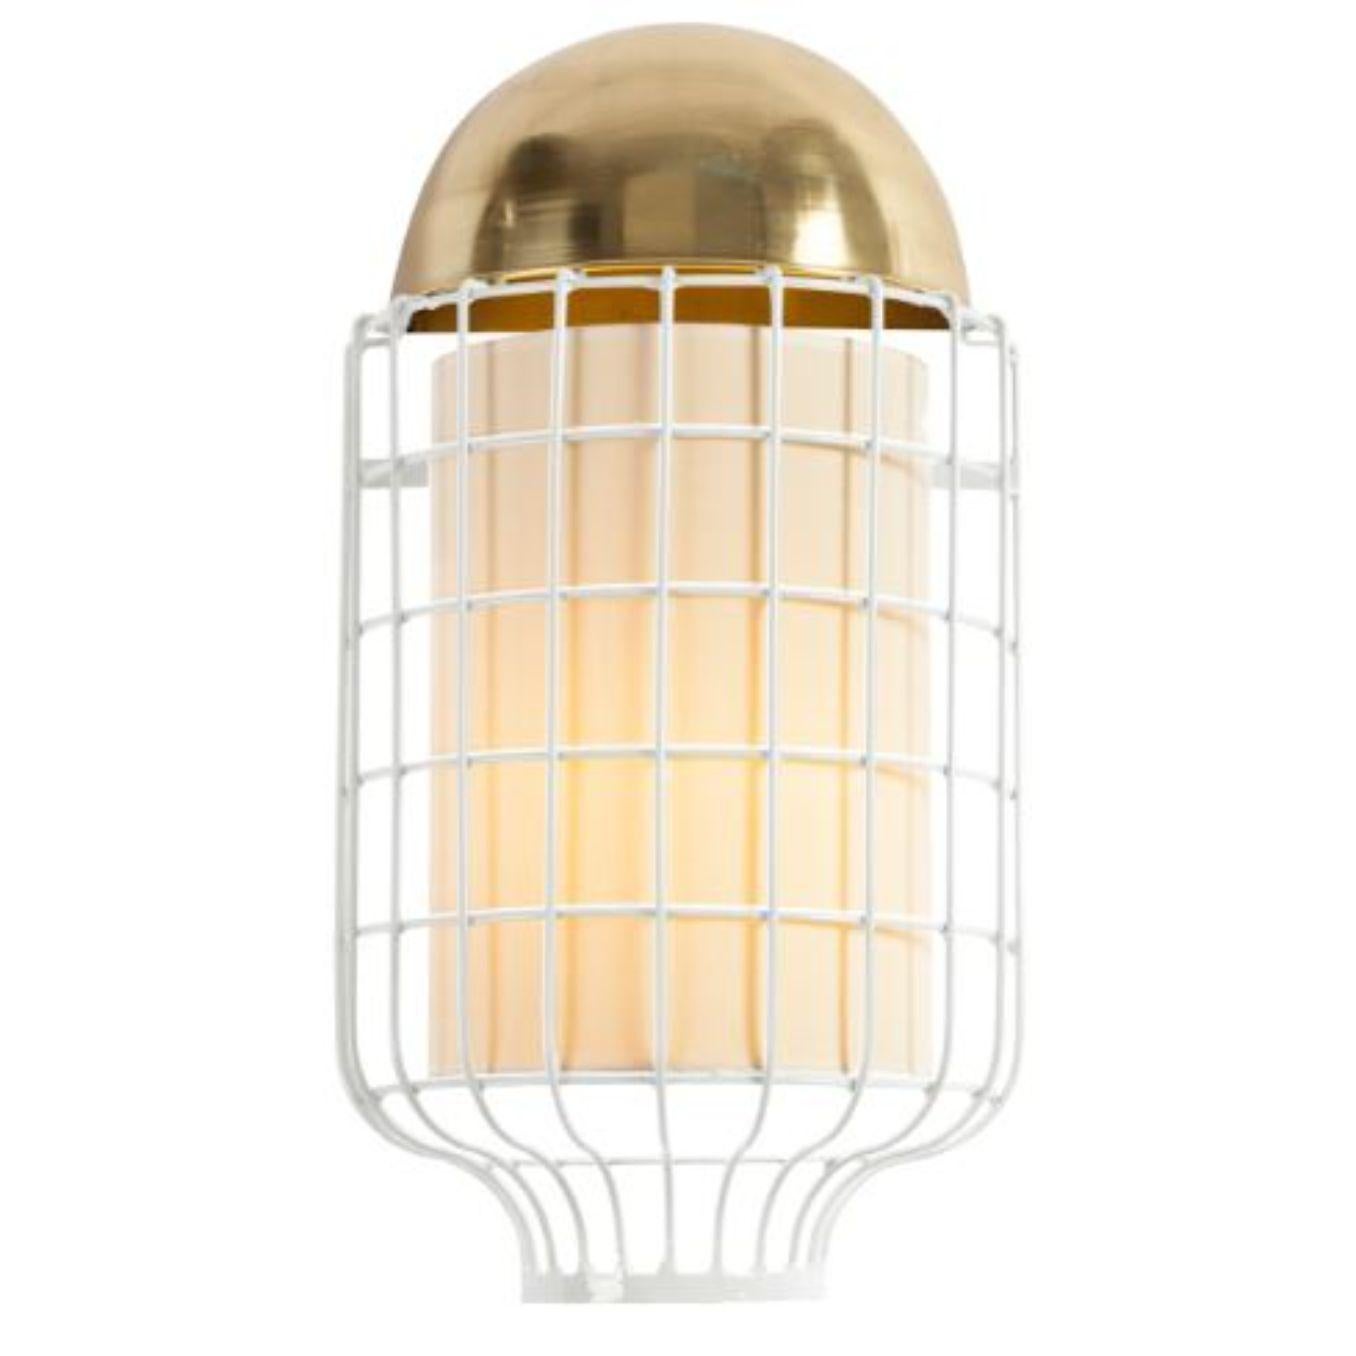 Brass and ivory Magnolia wall lamp by Dooq
Dimensions: W 30 x D 13 x H 56 cm
Materials: lacquered metal, polished or brushed metal, brass.
Abat-jour: cotton
Also available in different colours and materials.

Information:
230V/50Hz
E14/1x15W